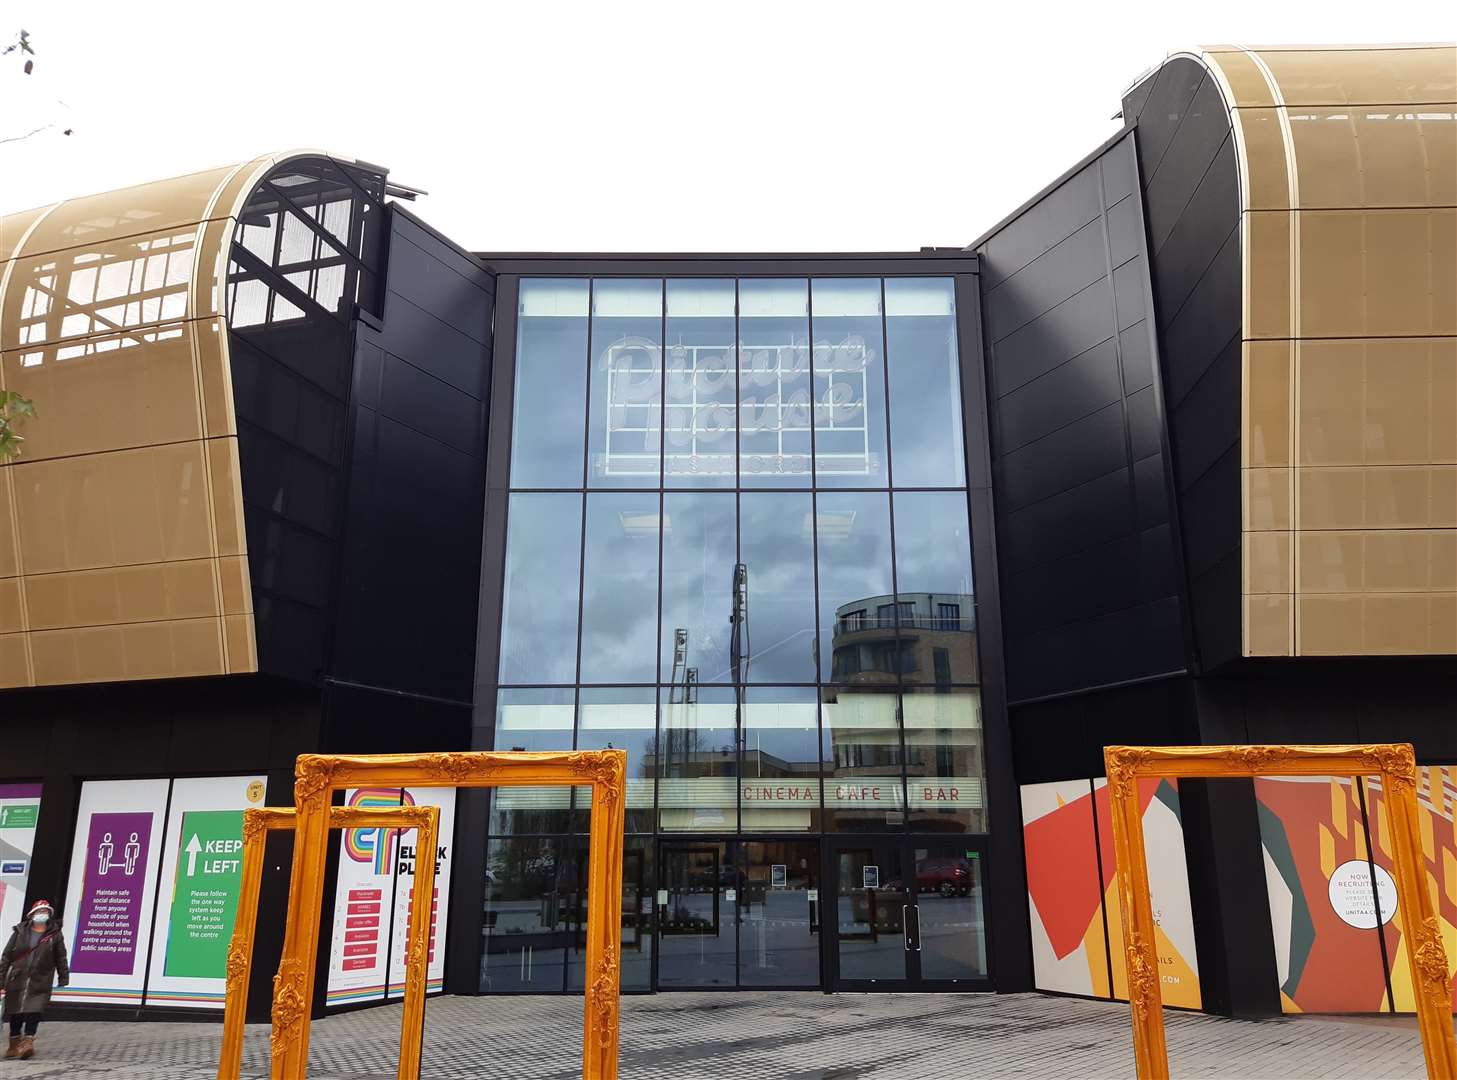 The Picturehouse cinema at Elwick Place opened in December 2018, but many of the other units have remained empty since then